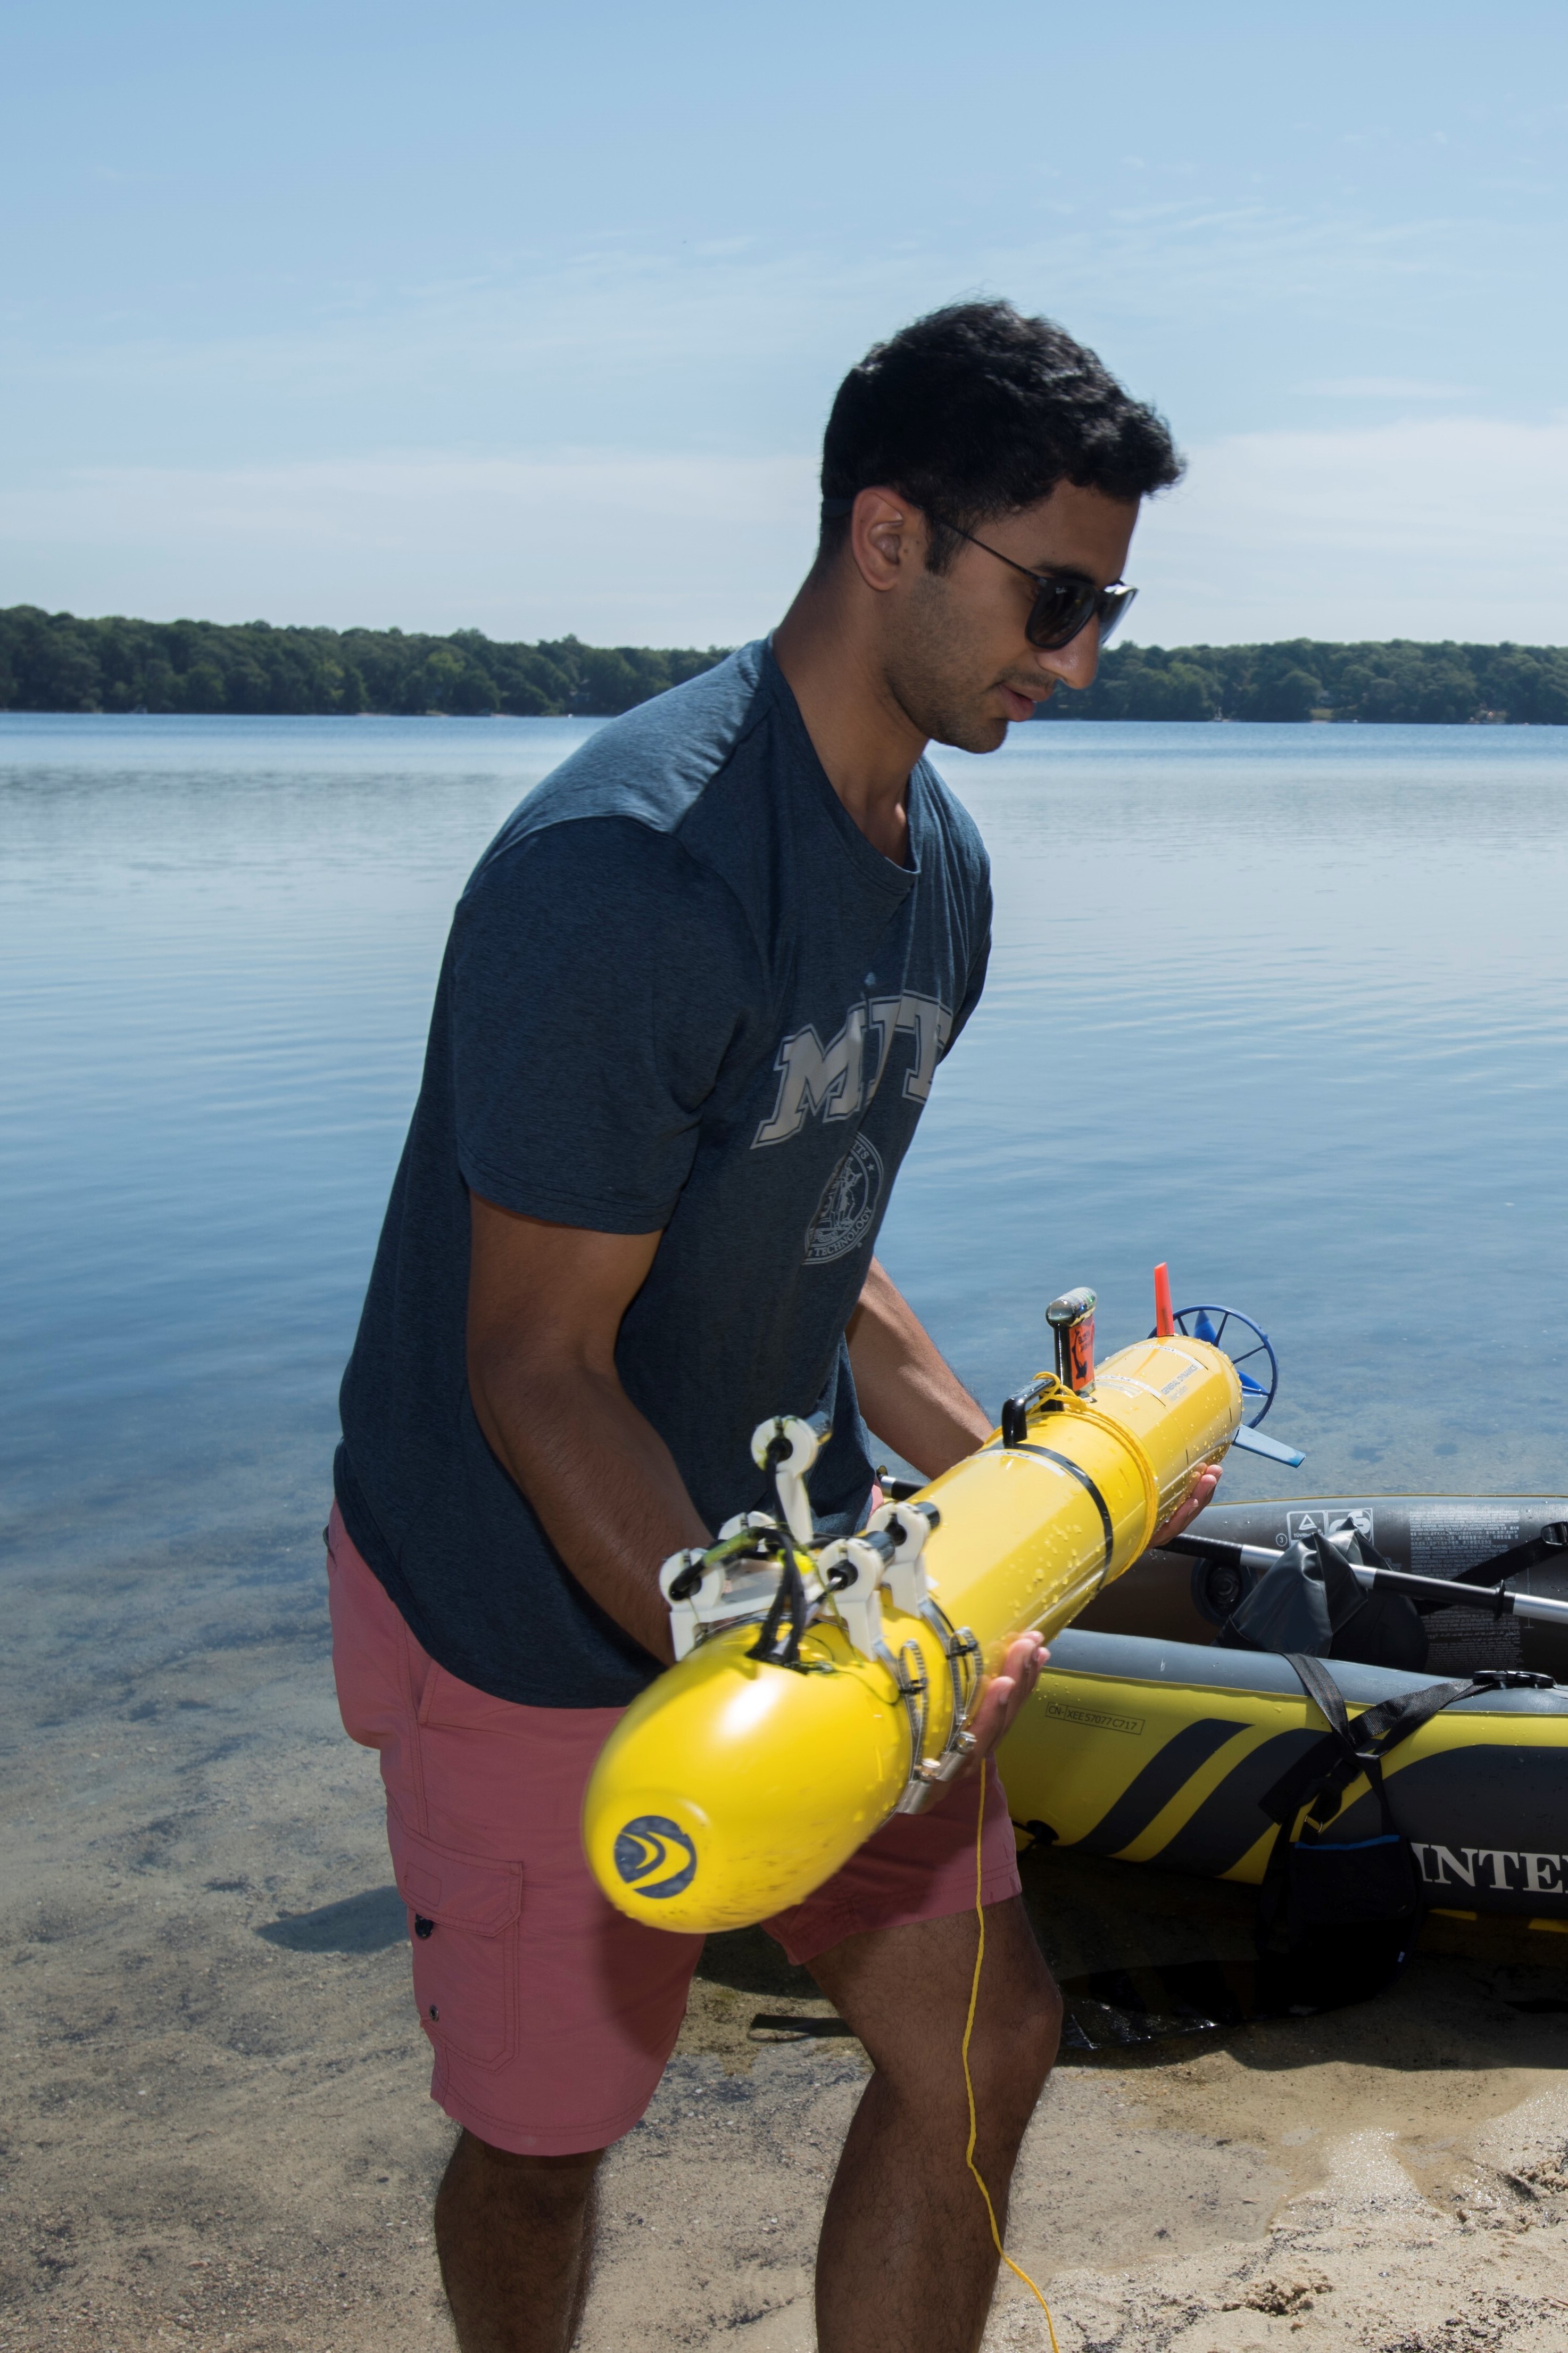 EeShan Bhatt cradles an autonomous underwater vehicle (AUV) in between test trials at Ashumet Pond, Falmouth, MA.